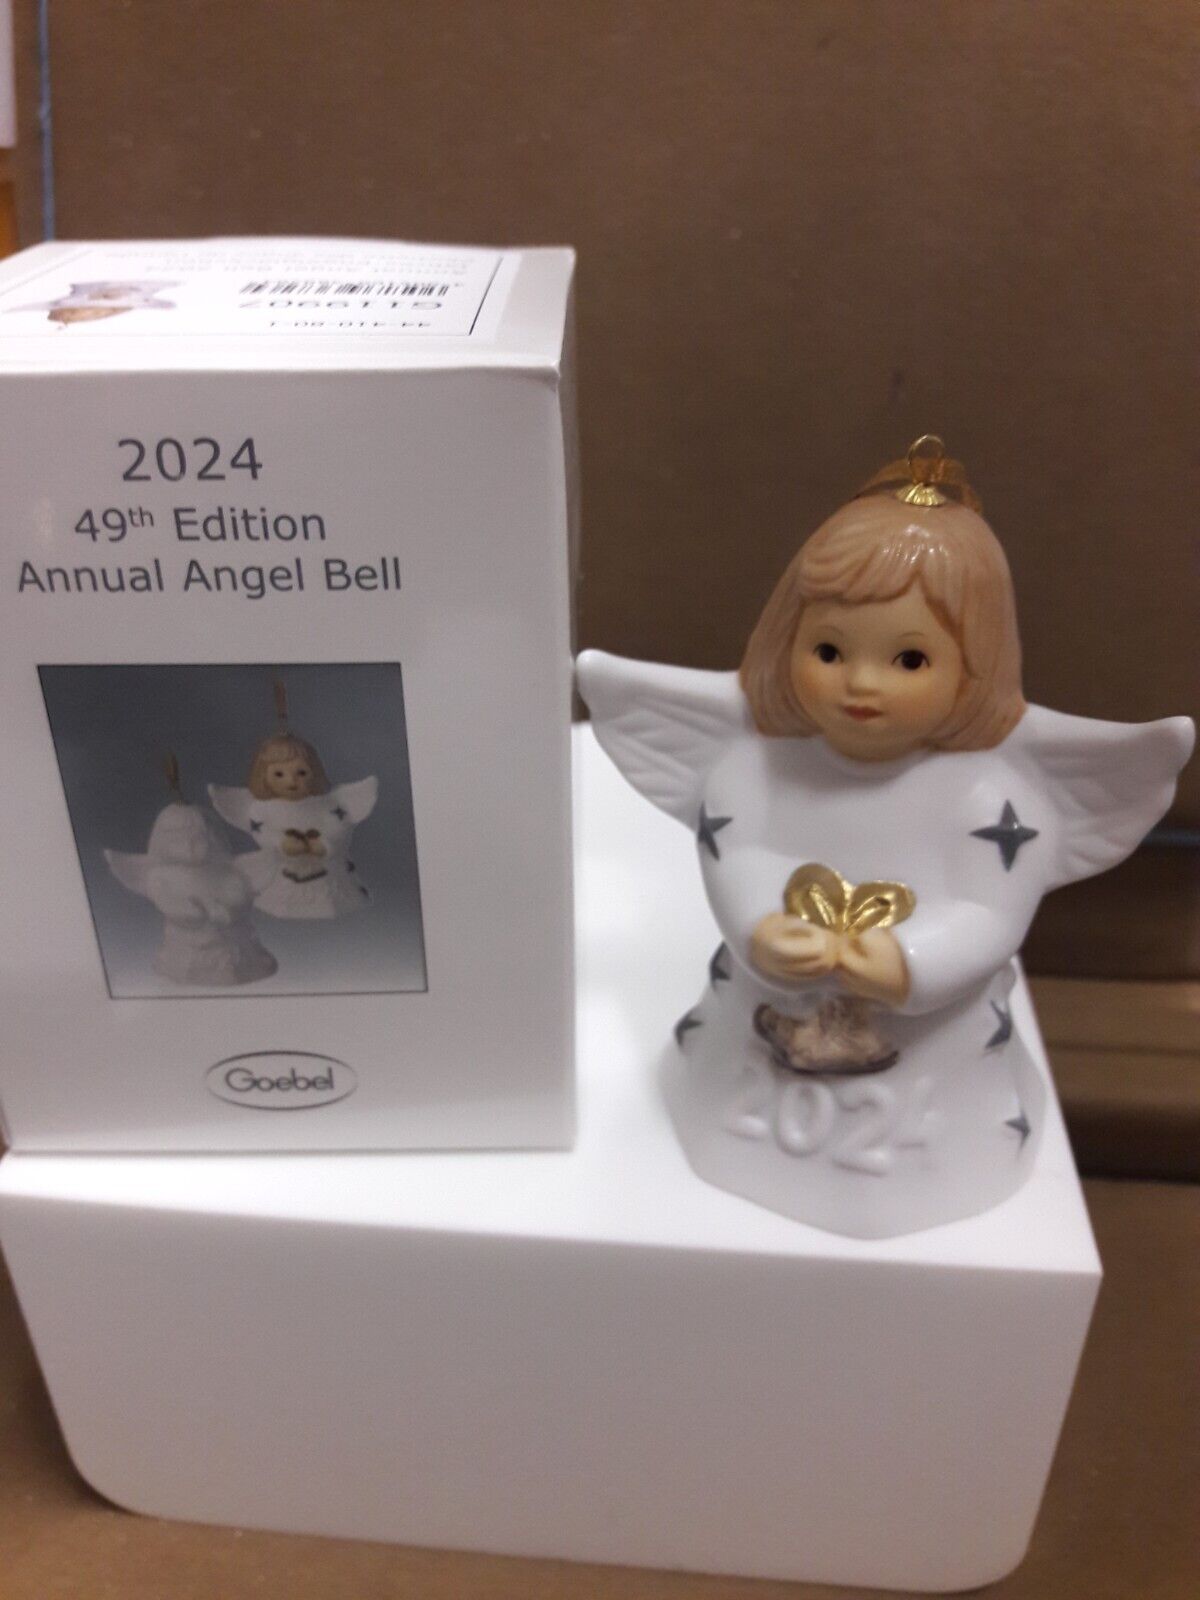 GOEBEL,  2024 ANNUAL ANGEL BELL, 49TH EDITION, COLOR-PARTIALLY PAINTED, NEW, MIB